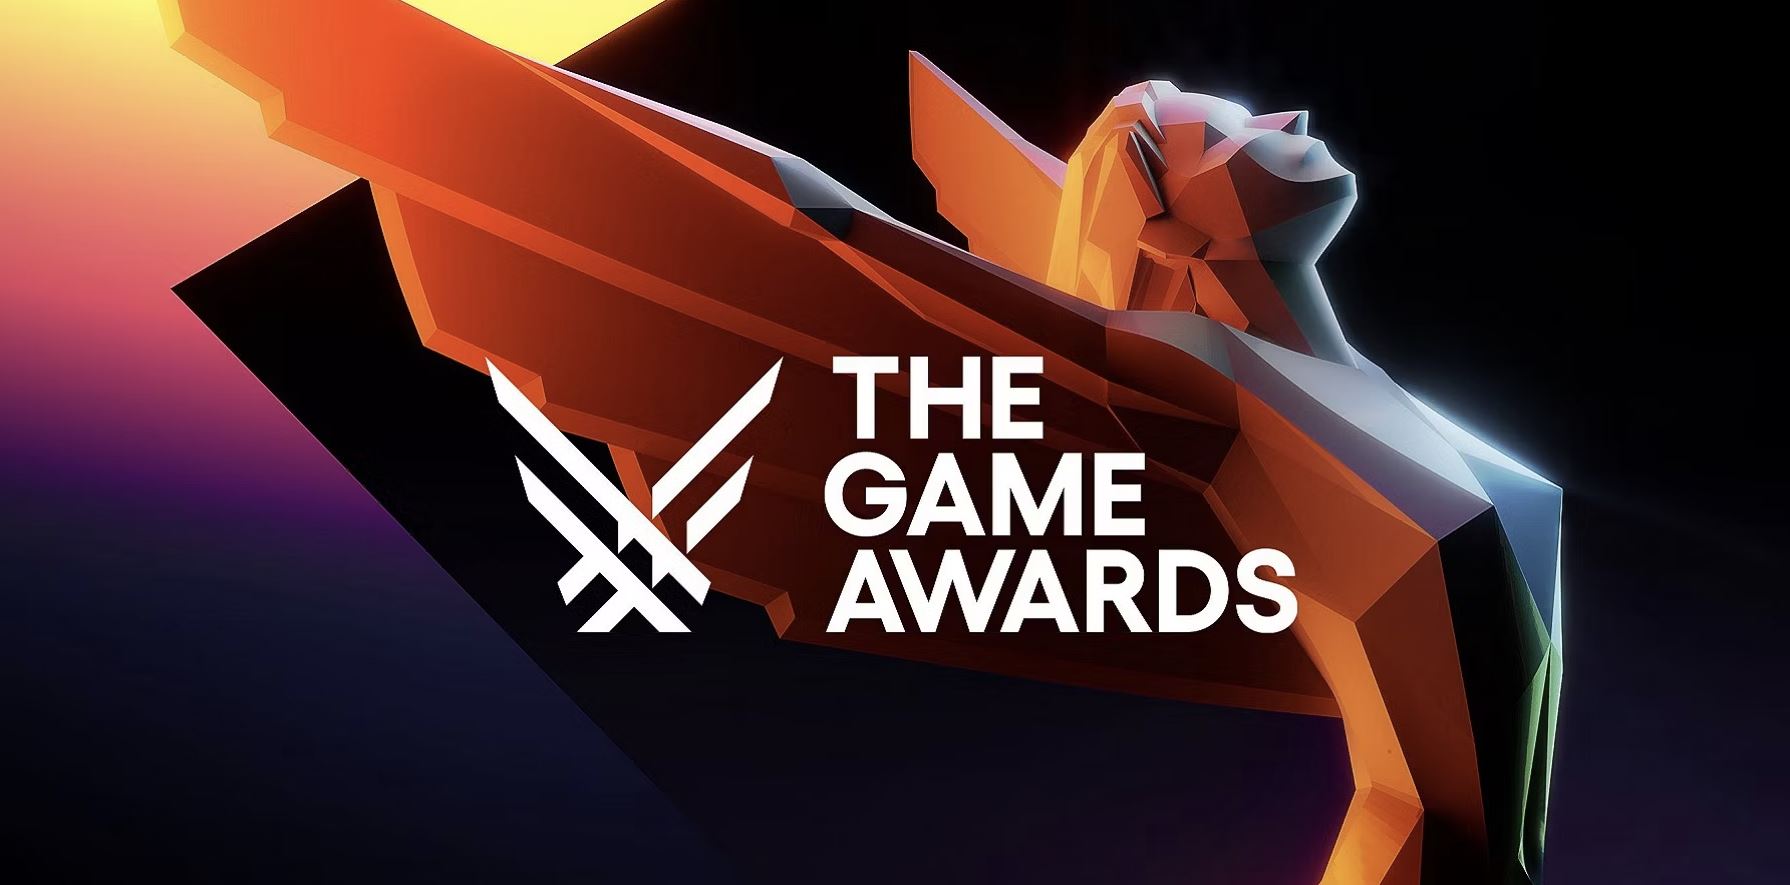 THE GAME AWARDS 2021: It Takes Two wins Game Of The Year 